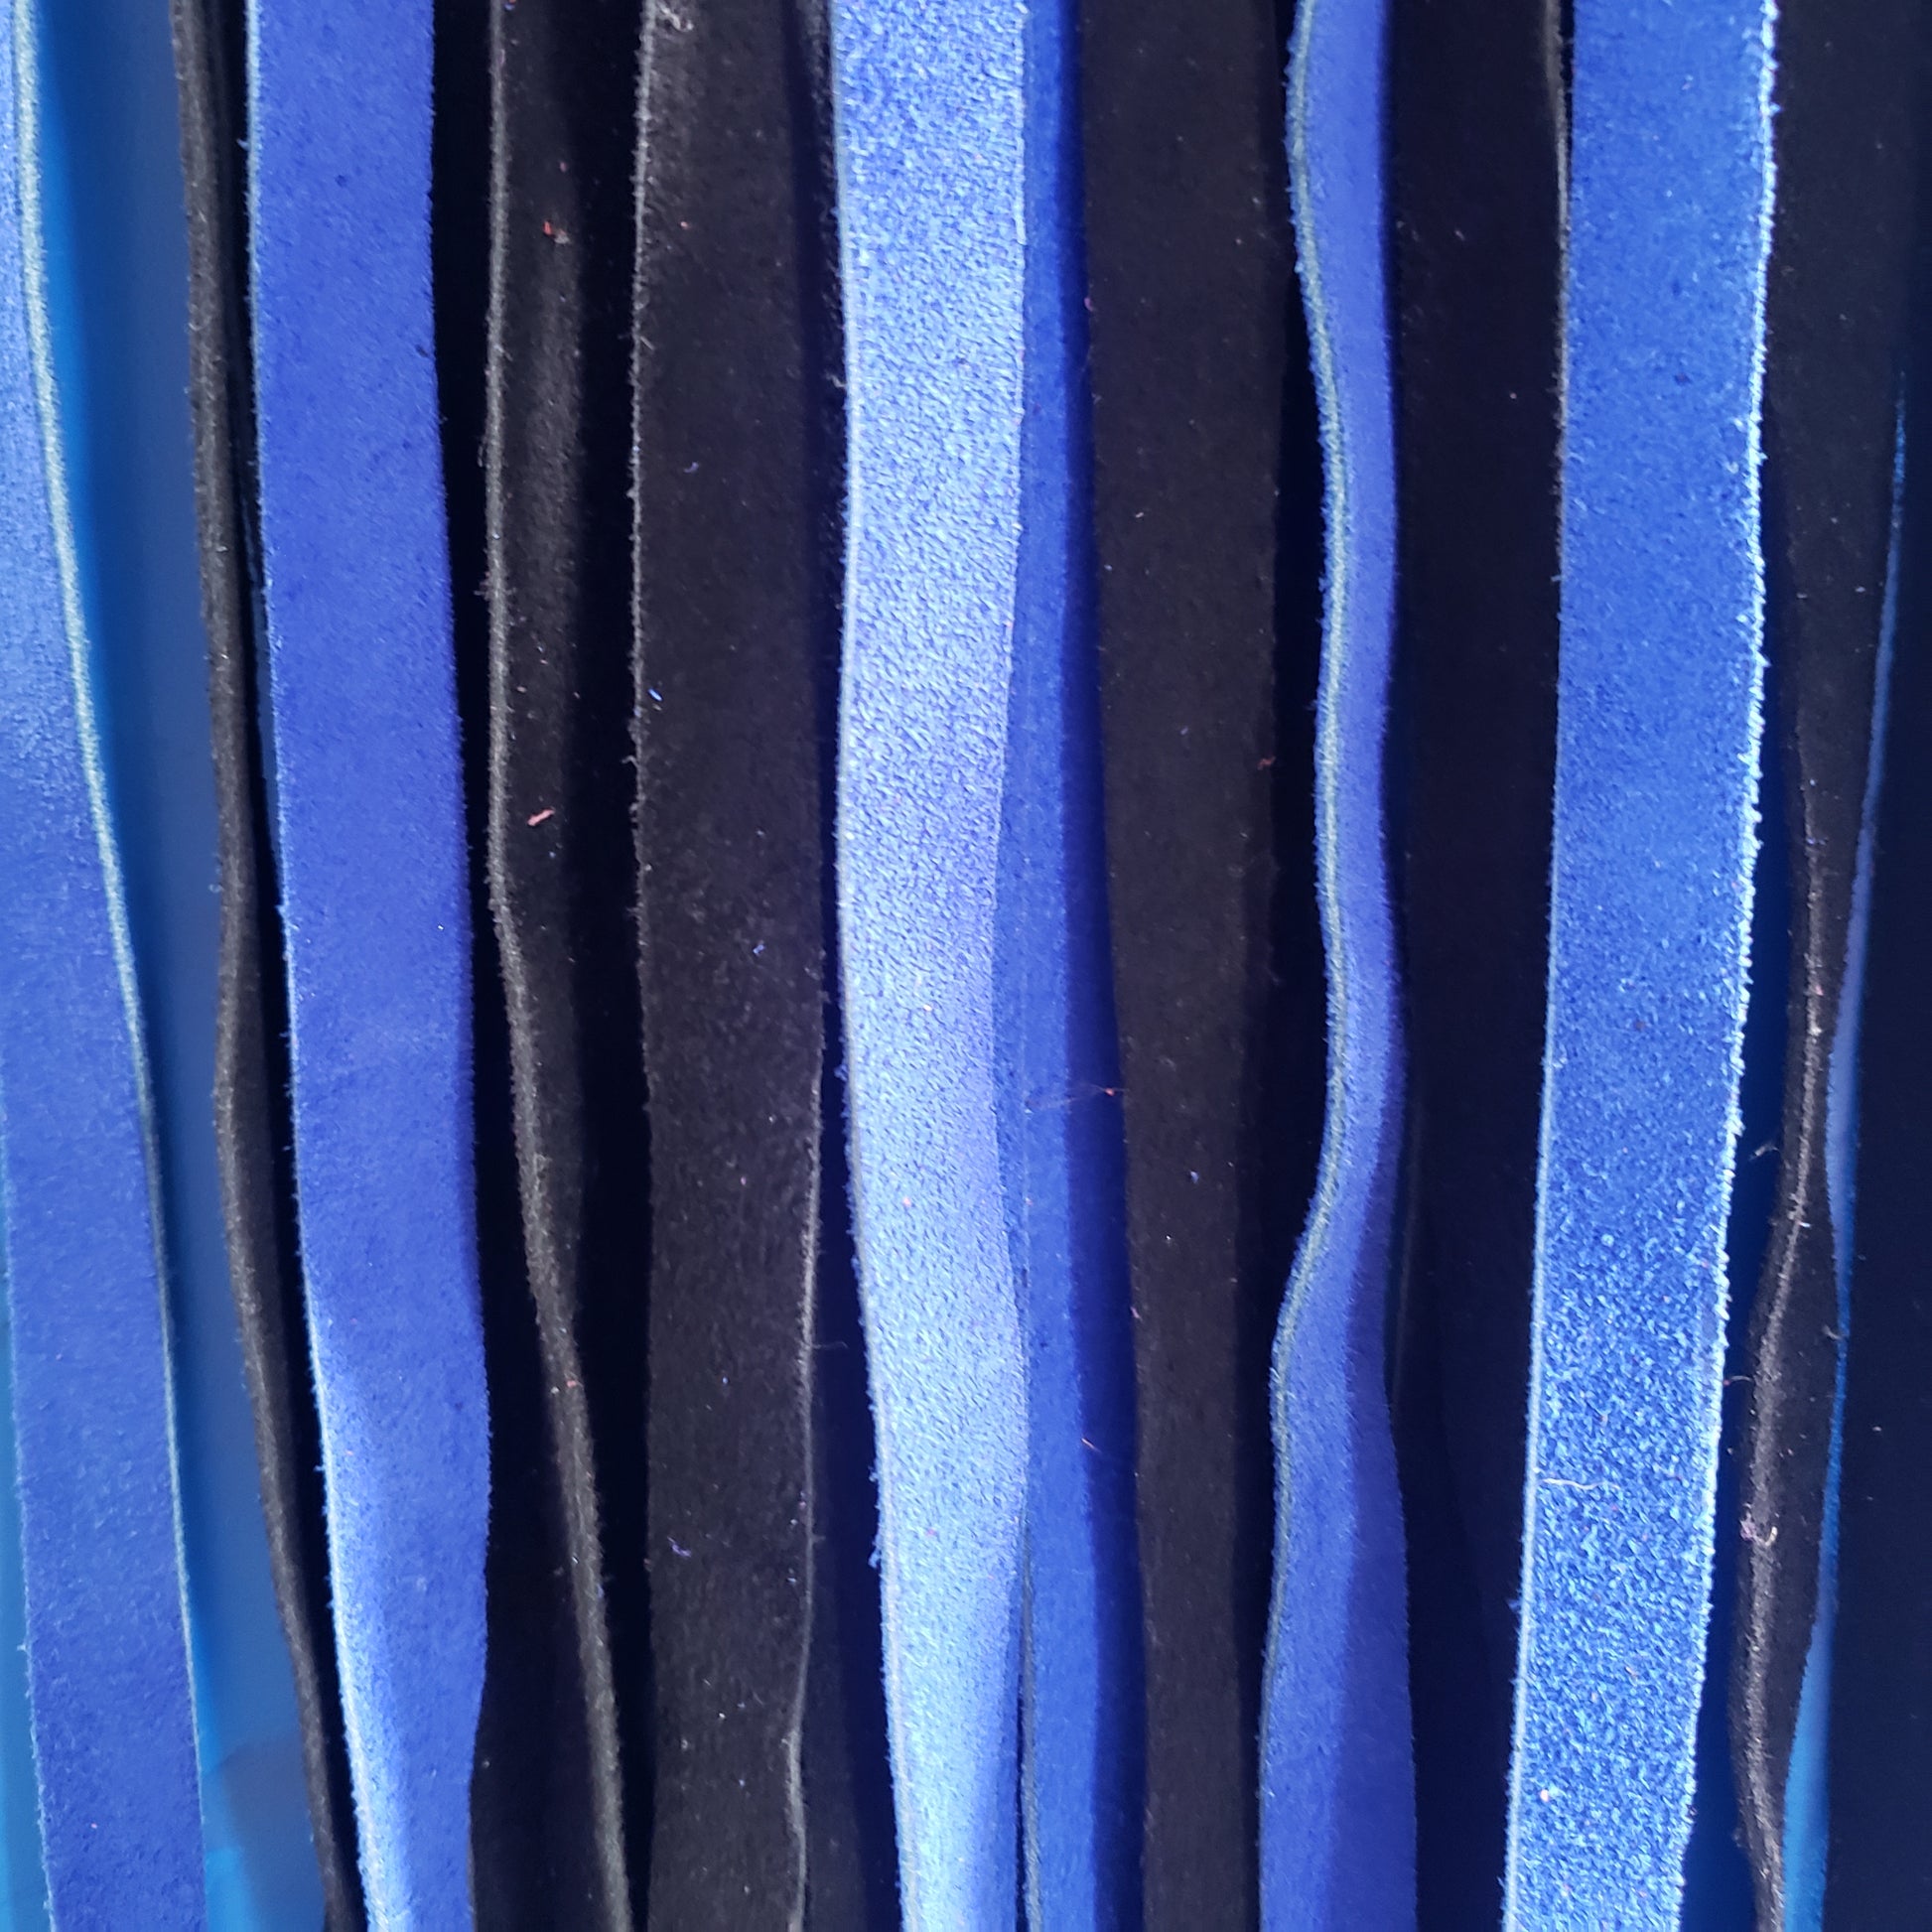 A closeup of the blue and black suede finger loop flogger.